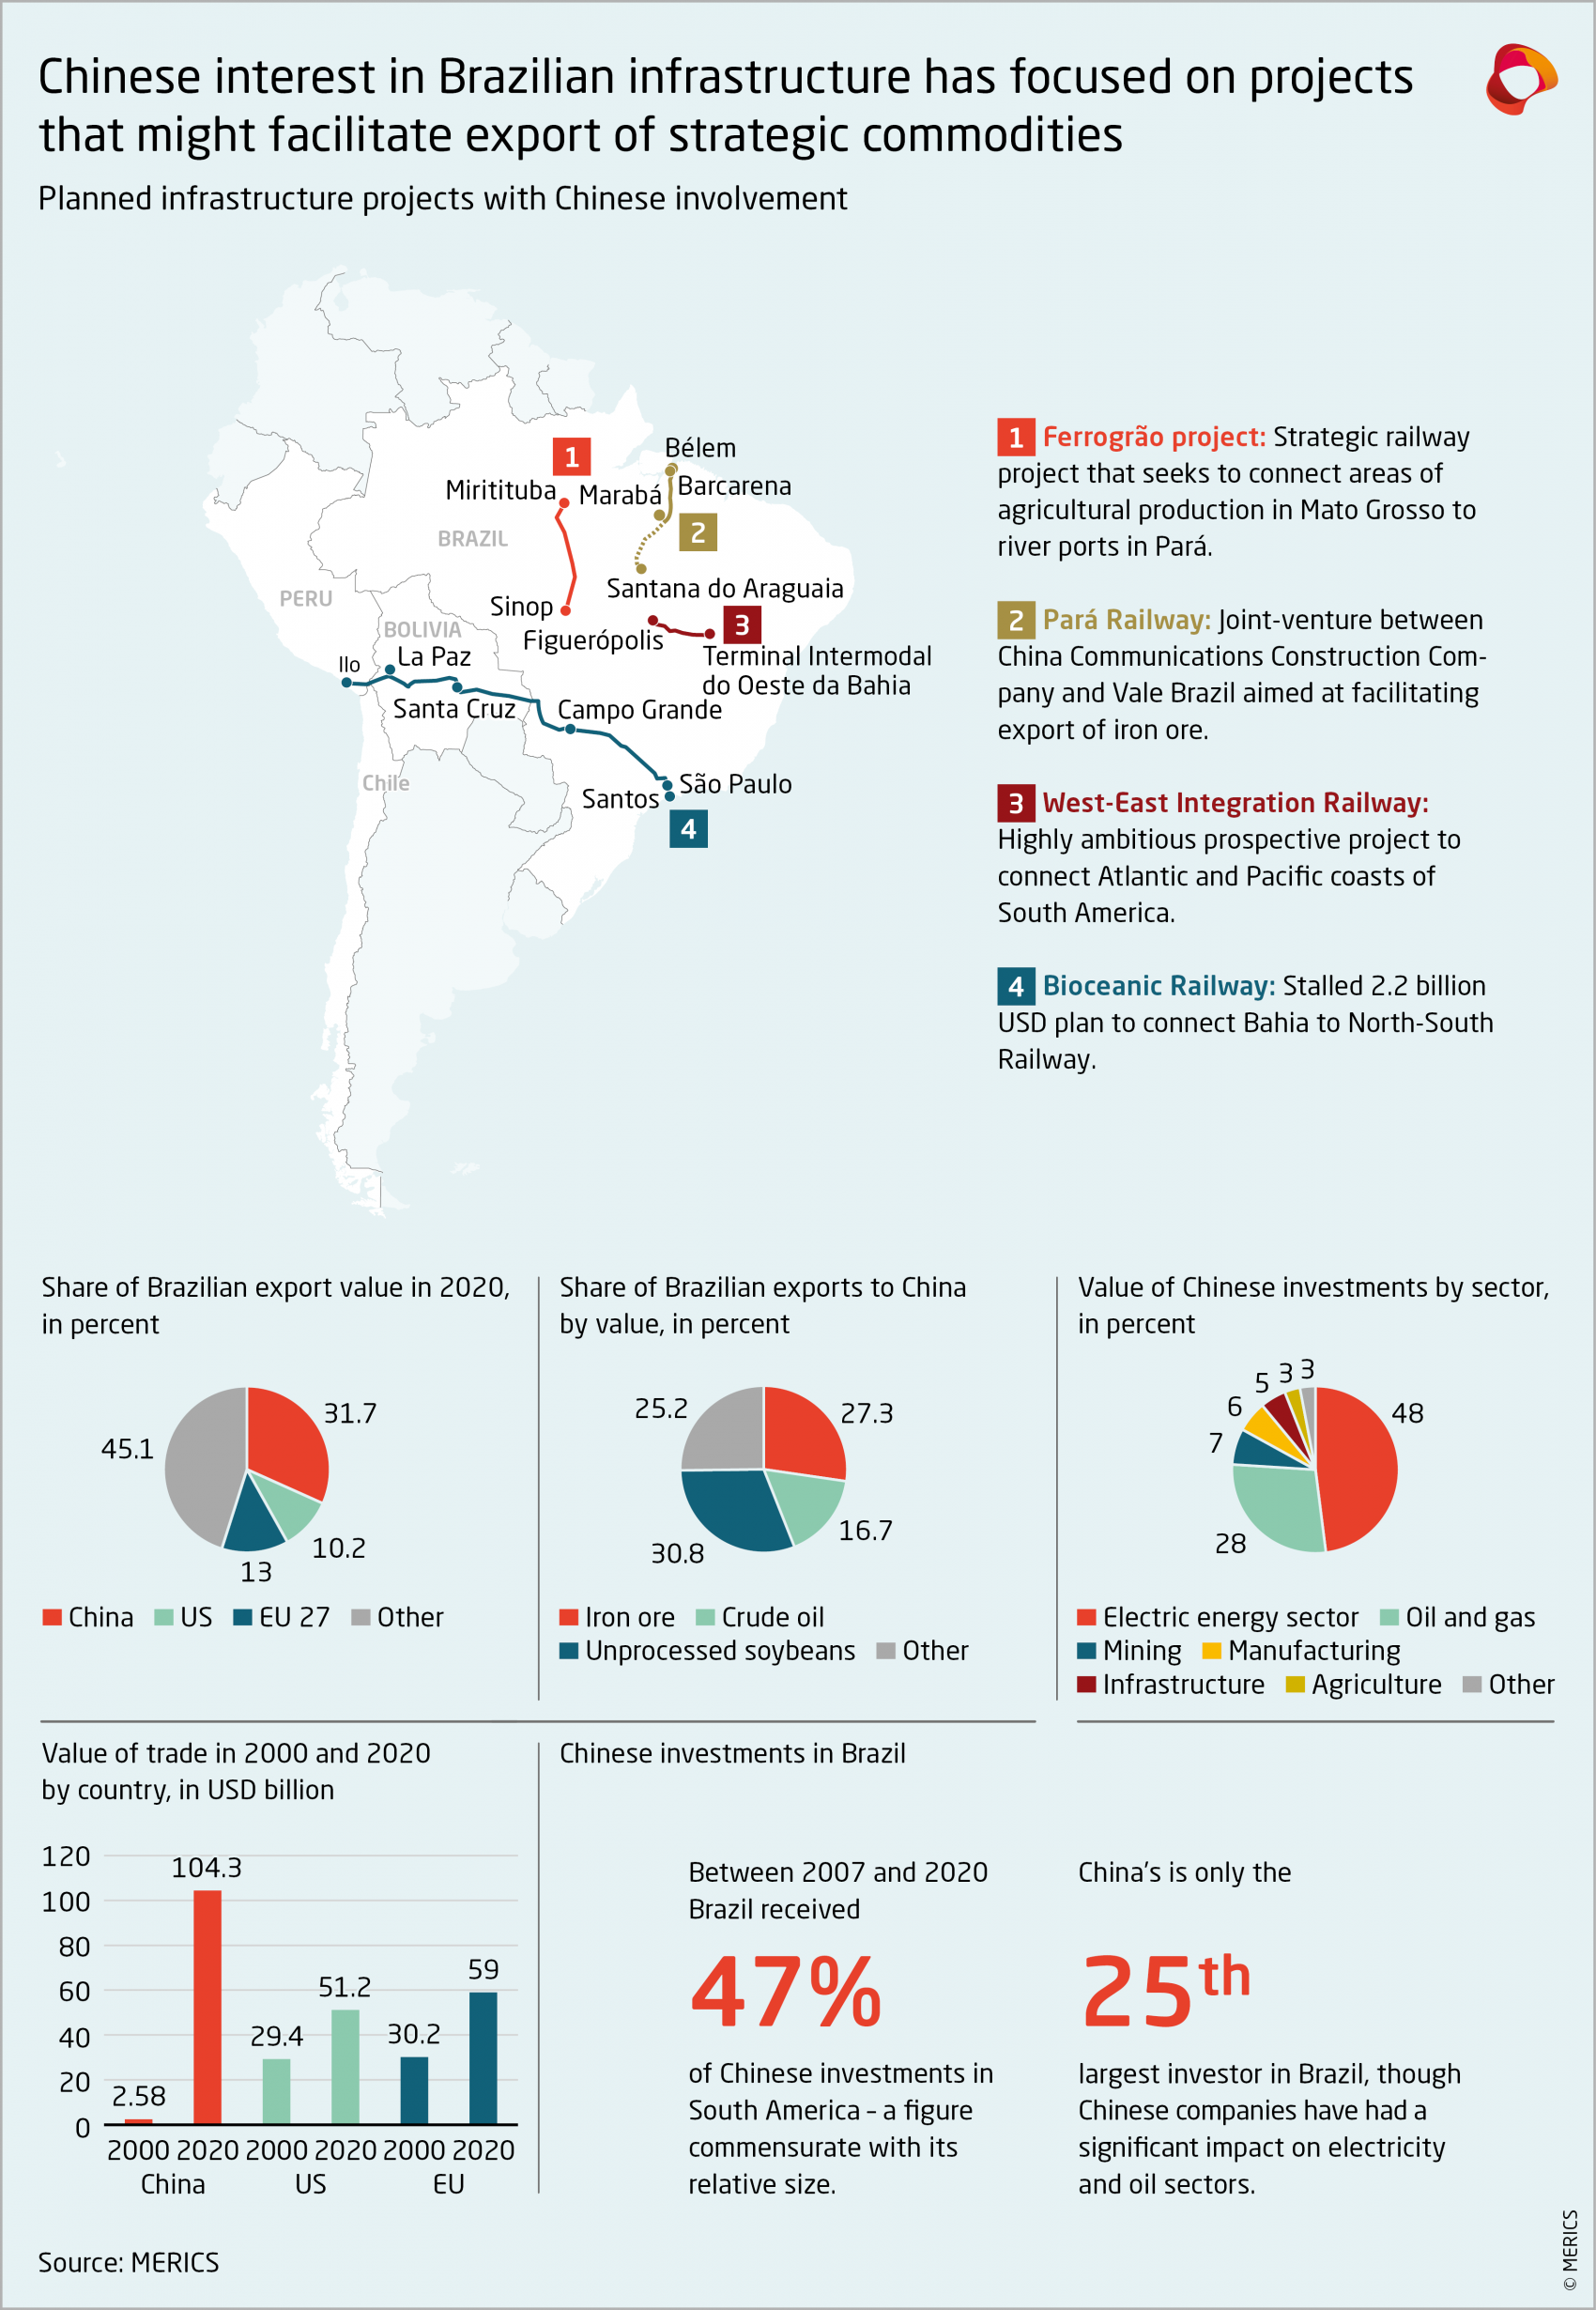 MERICS-Global-China-Inc-Planned infrastructure projects with Chinese involvement in Brazil